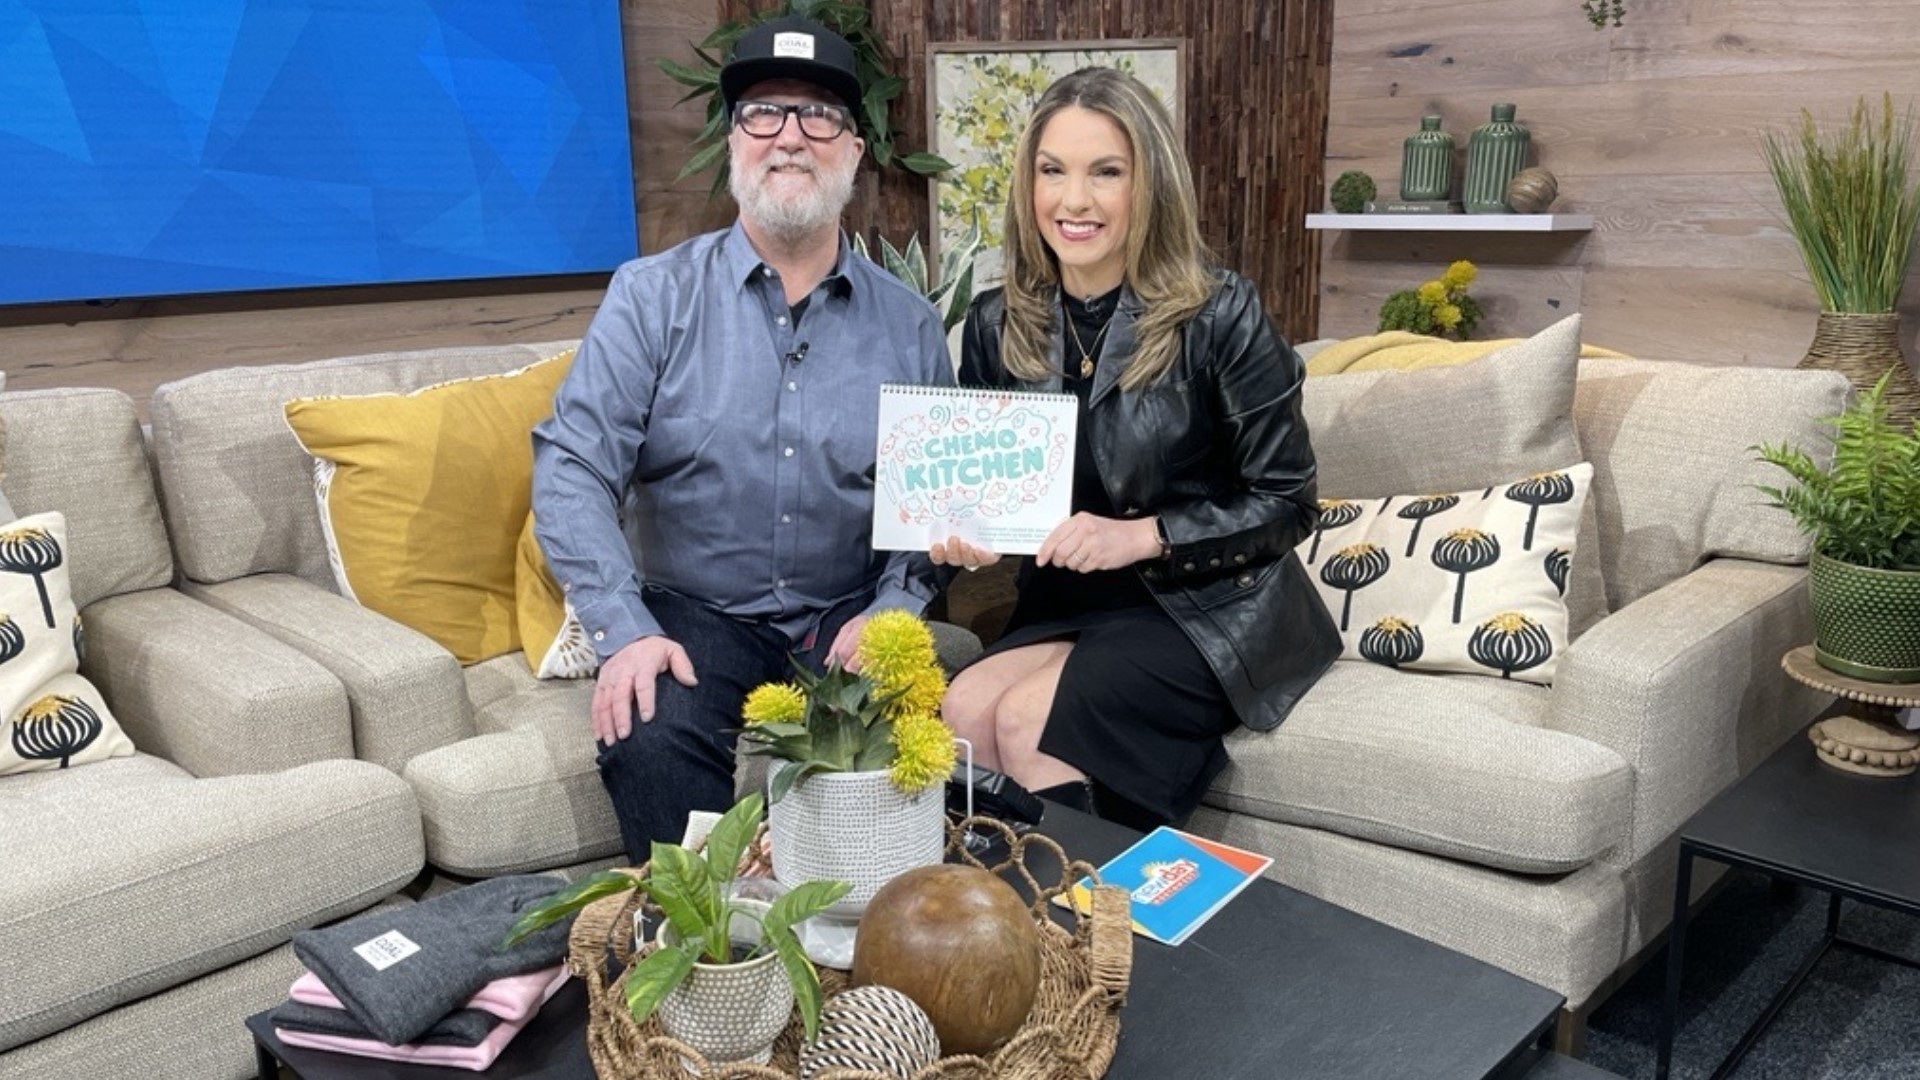 Bob Prince from the Chemo Kitchen joined the show to discuss their new cookbook featuring recipes from Seattle chefs. #newdaynw